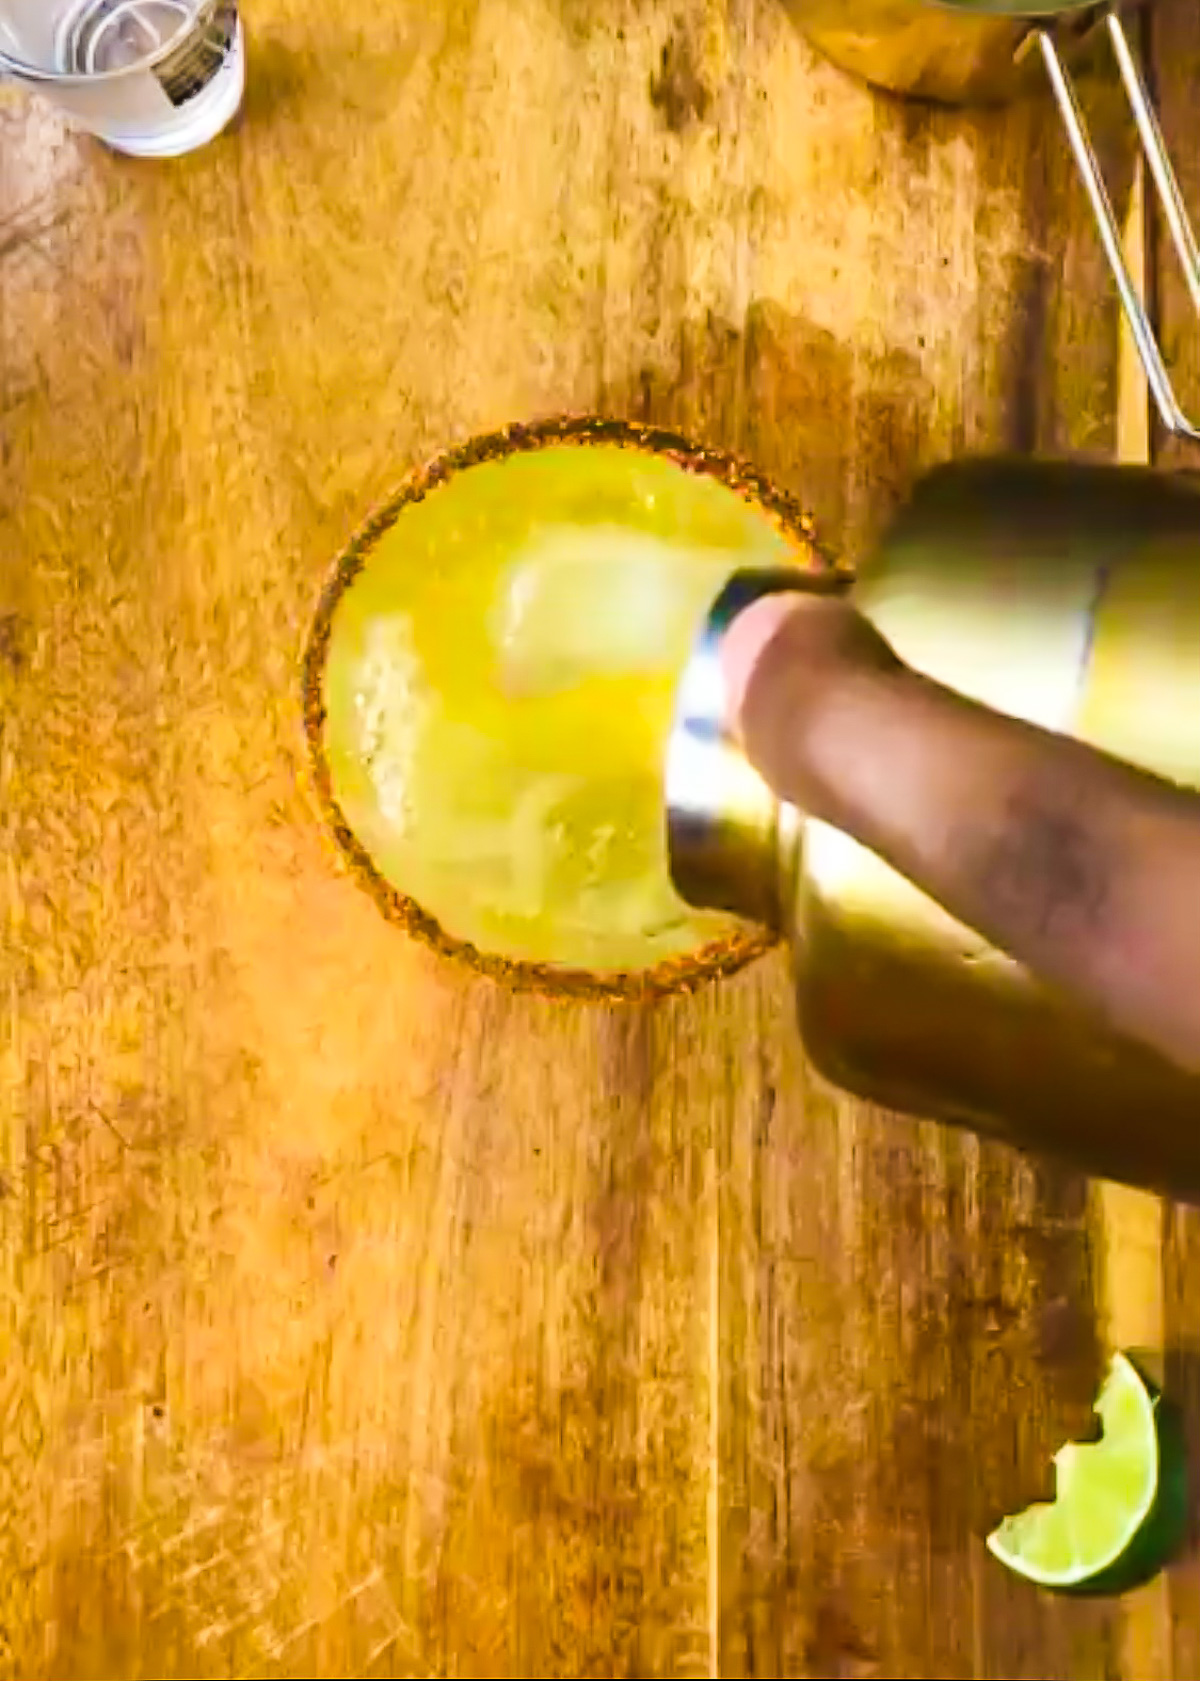 pouring homemade passion fruit juice margarita from gold cocktail shaker into spicy rimmed glass over ice.